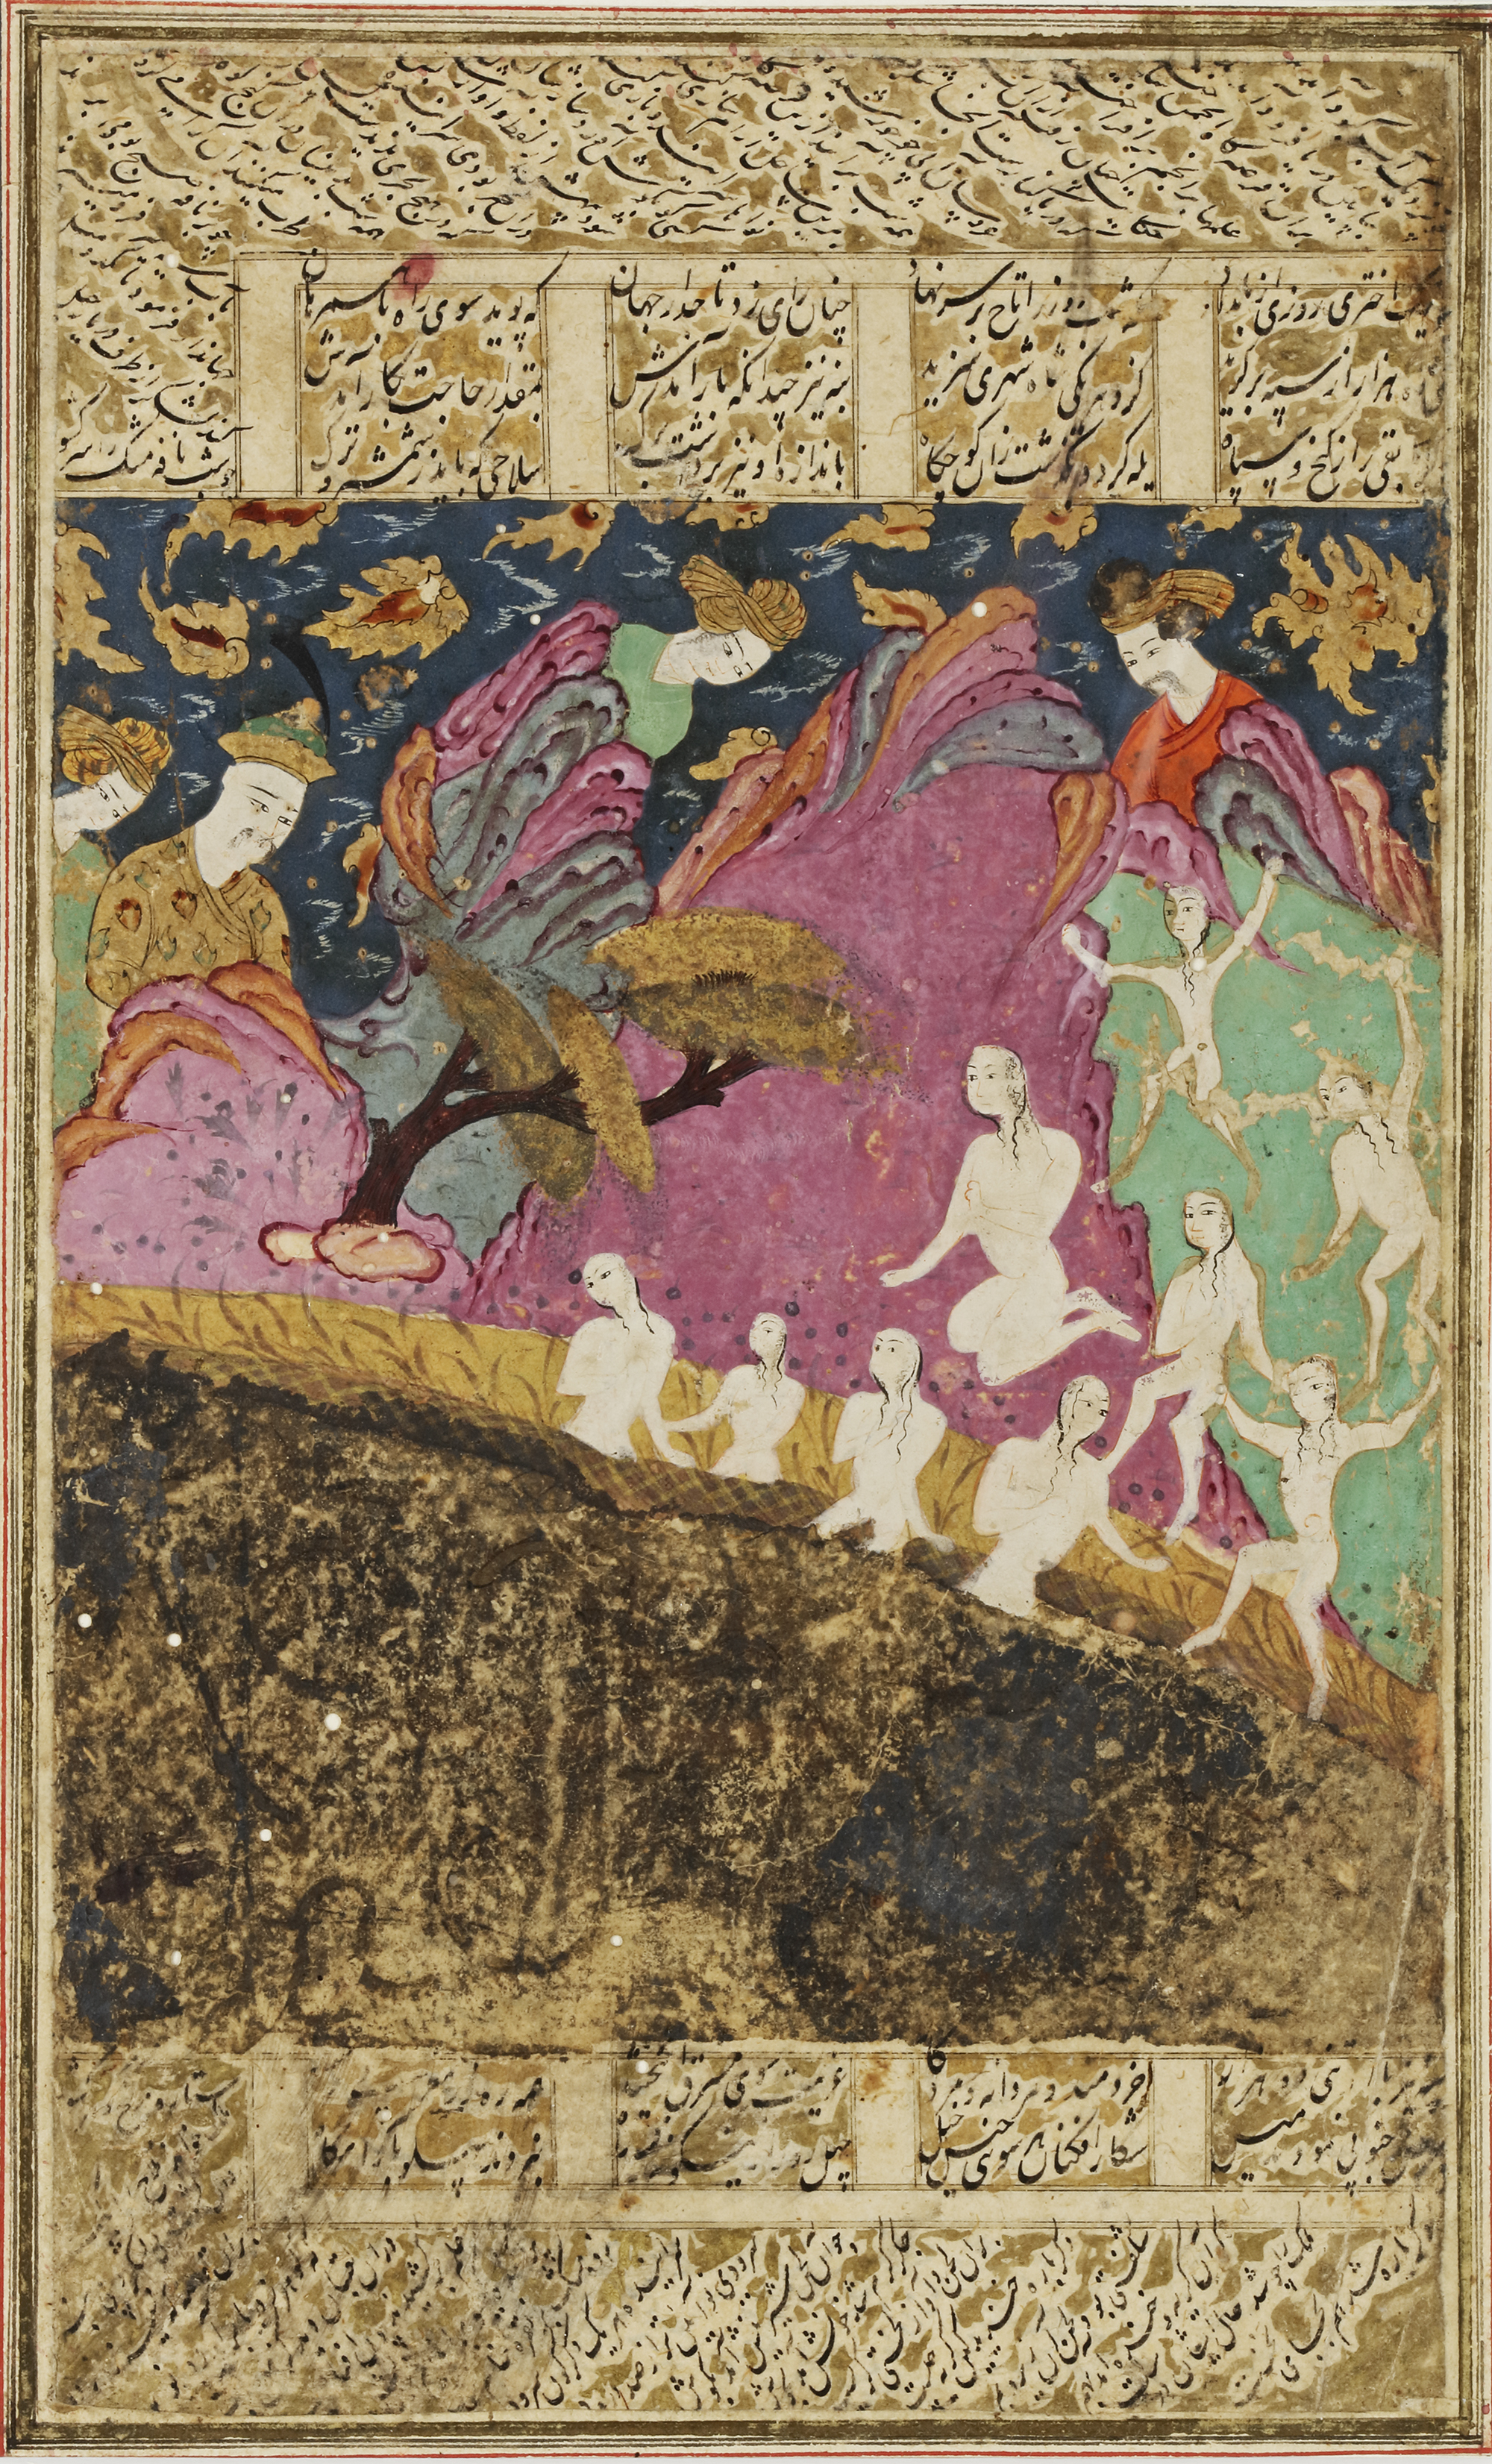 ISKANDER WATCHES THE MERMAIDS IN THE BATH, PERSIA SAFAVID, 18TH CENTURY - Image 2 of 2